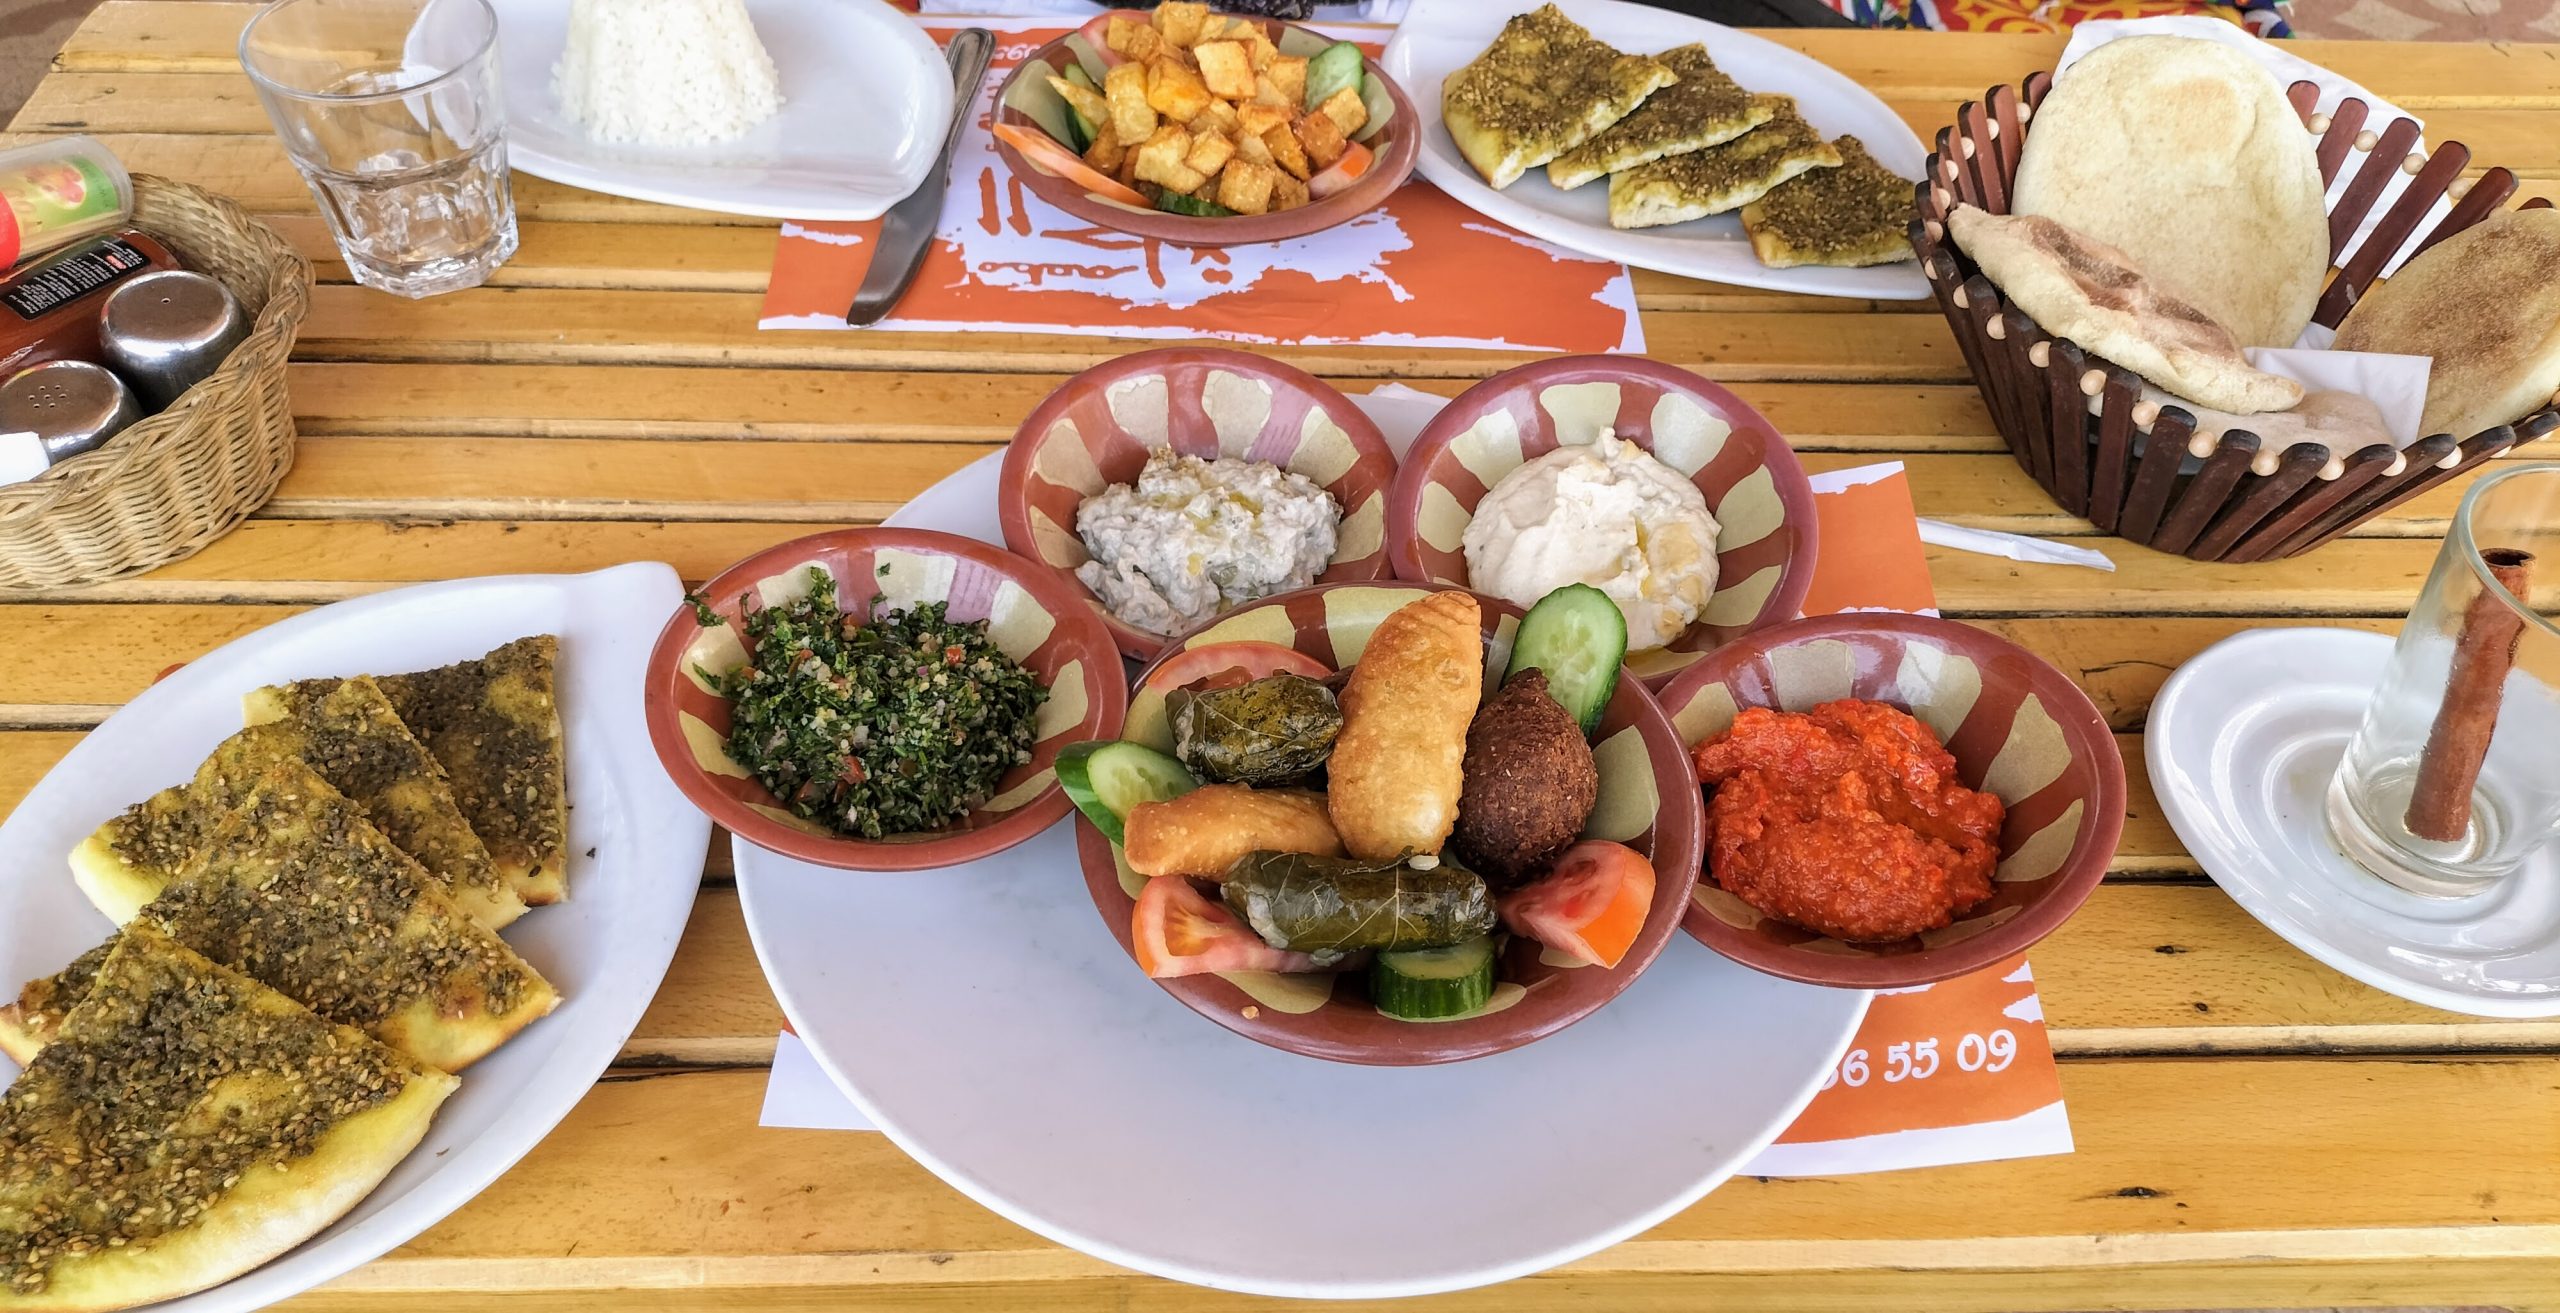 A range of Egyptian dishes